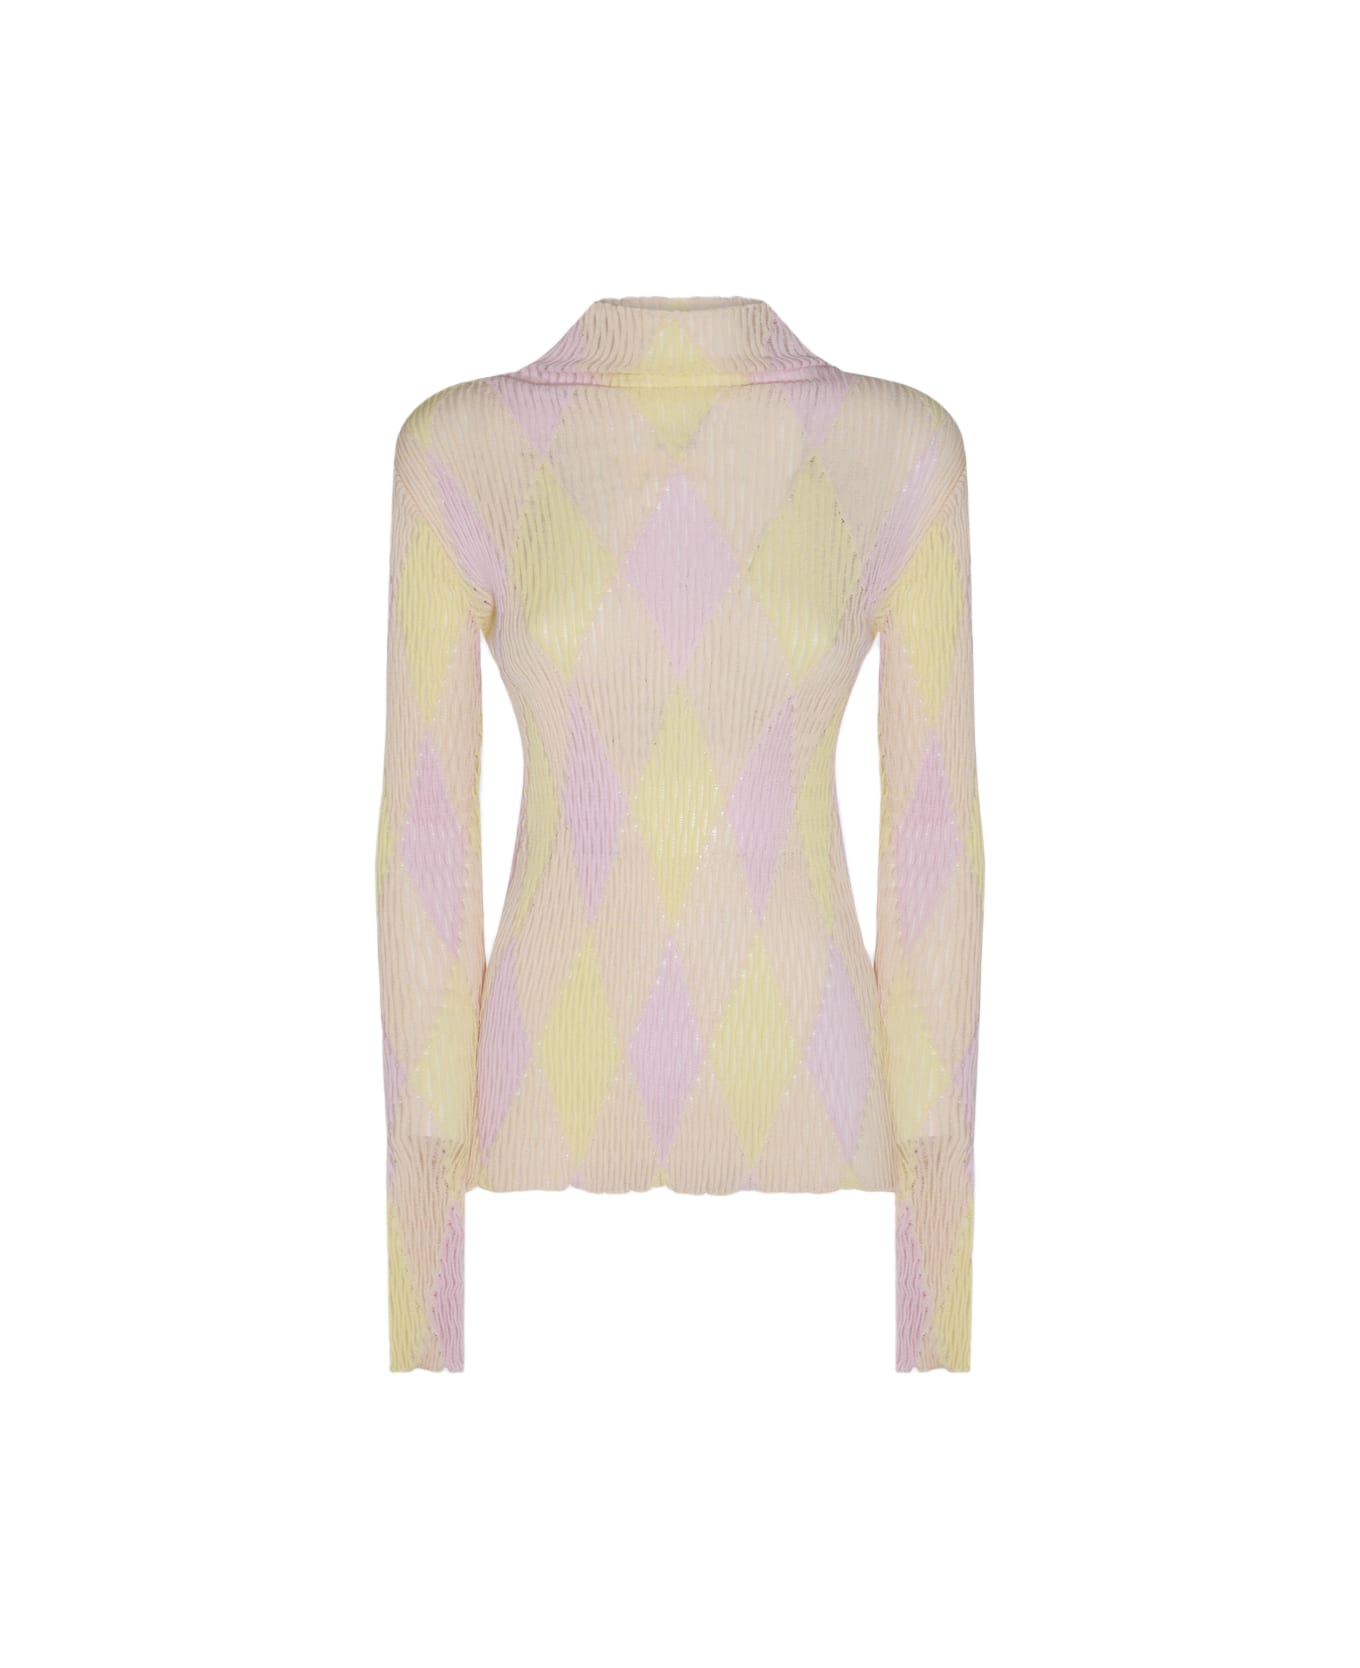 Burberry Eau White And Cream Cotton Knitwear - CAMEO IP PTTN